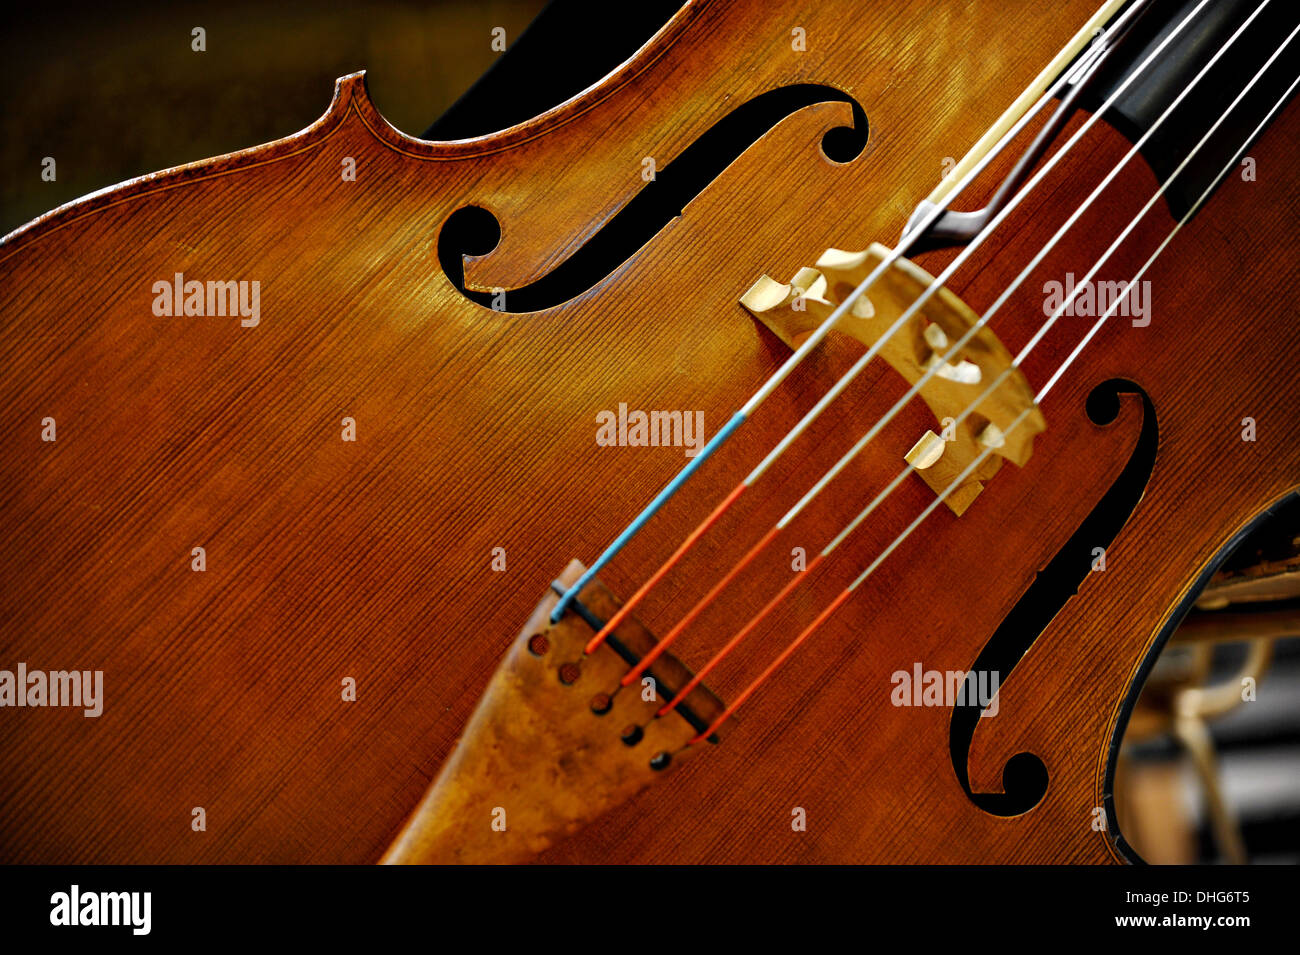 Detail of a double bass string music instrument Stock Photo